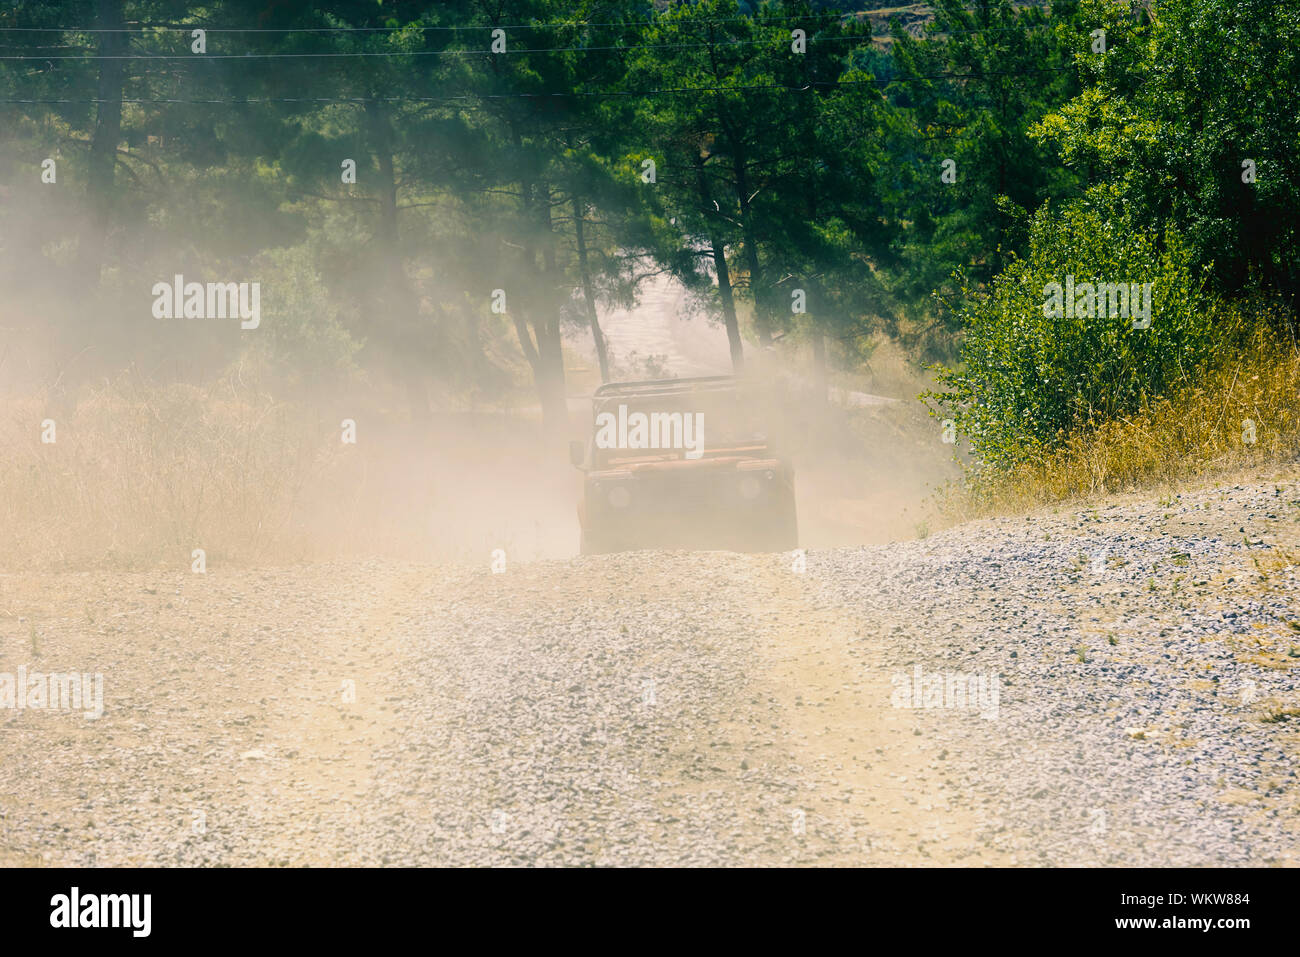 Off-road Vehicle On Dirt Road Stock Photo